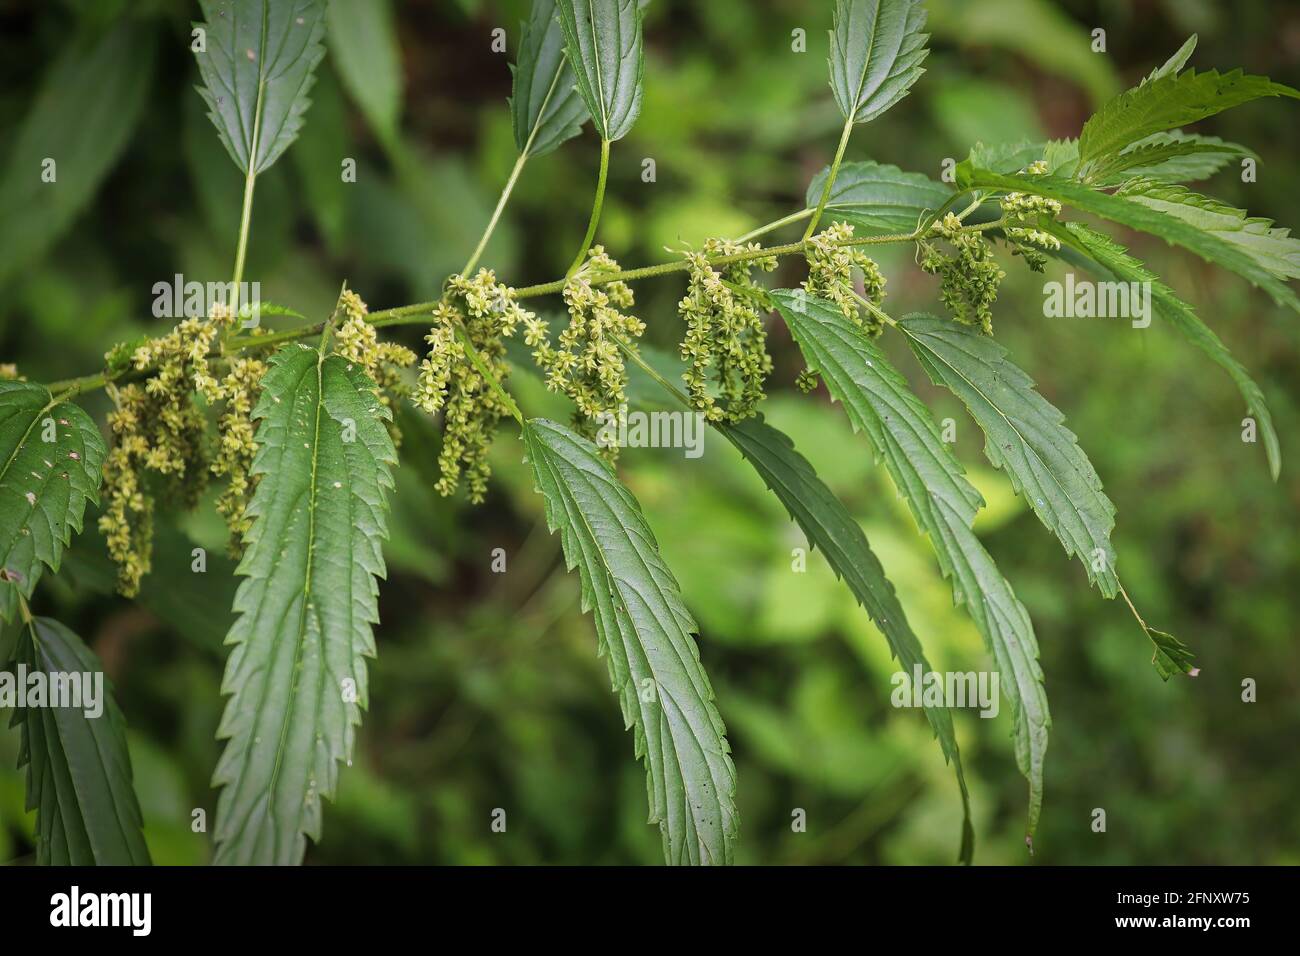 Closeup of stinging nettle with hanging flowers Stock Photo